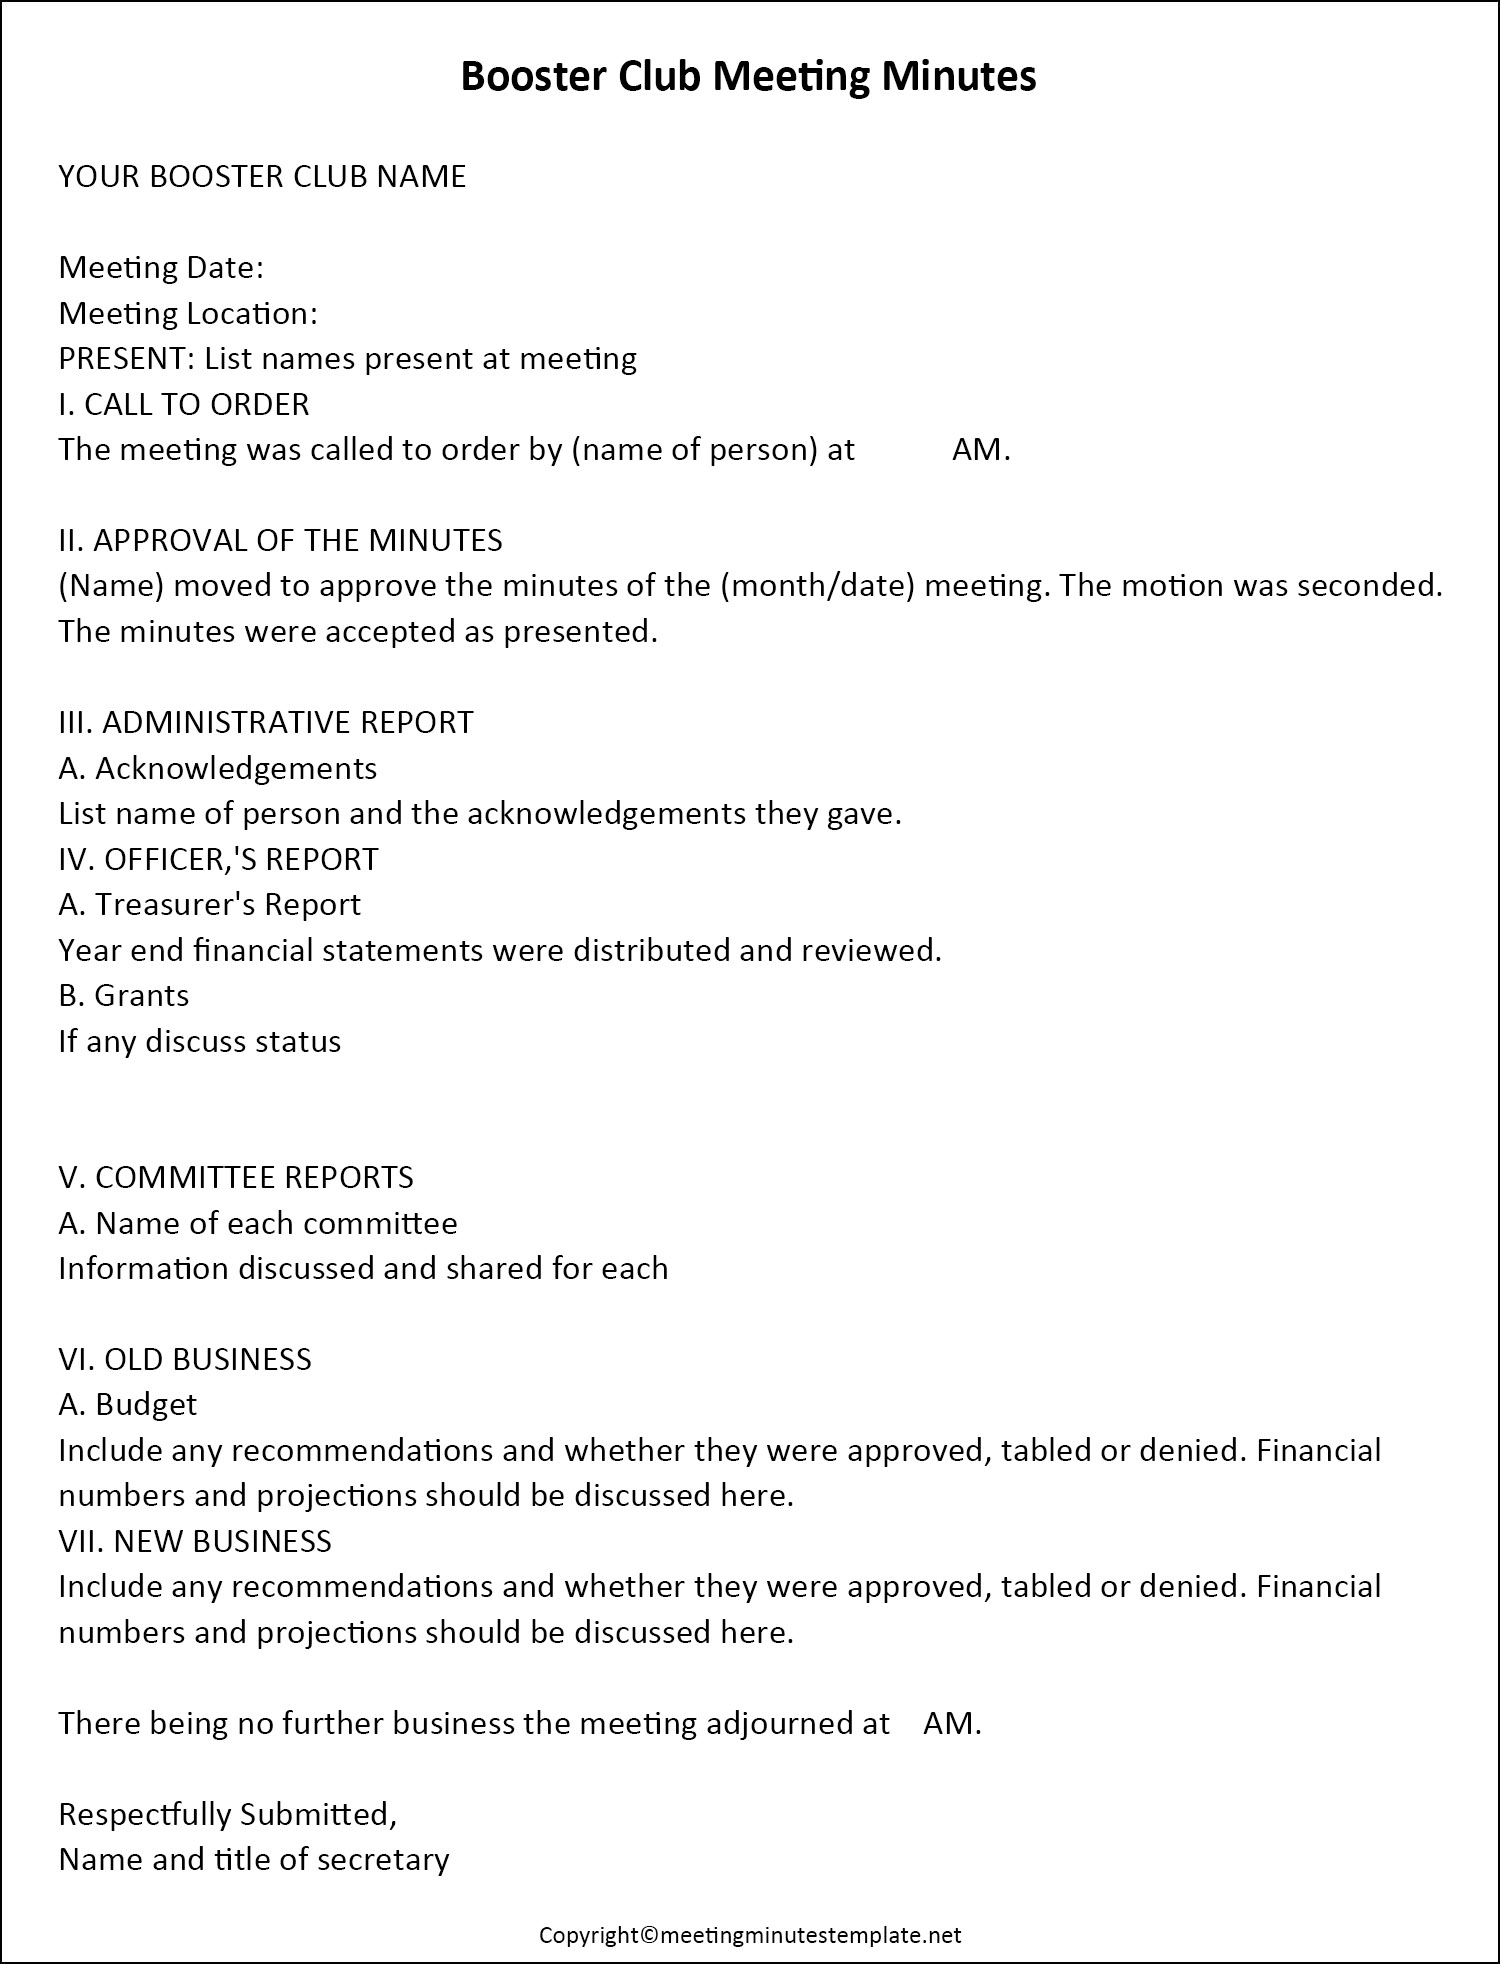 Booster Club Meeting Minutes Template